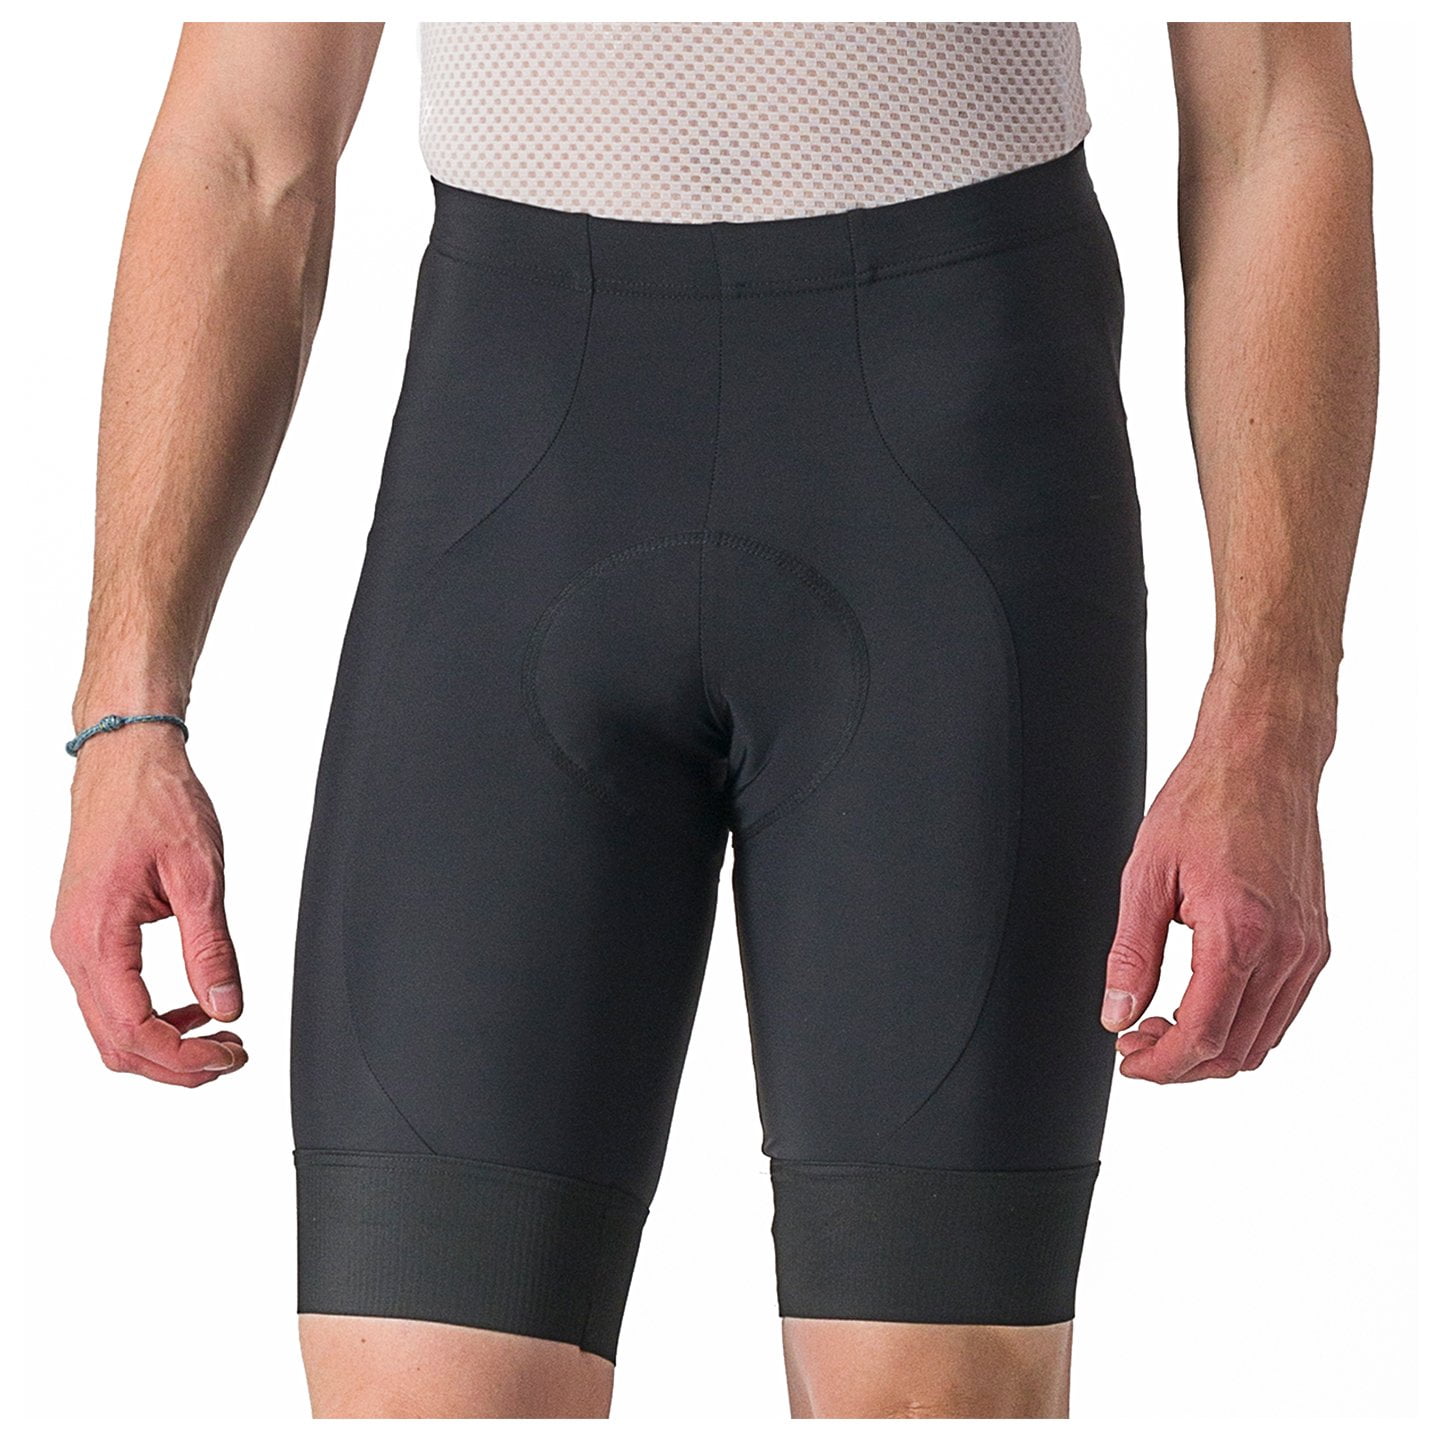 CASTELLI Entrata 2 Cycling Shorts Cycling Shorts, for men, size 3XL, Cycle trousers, Cycle gear